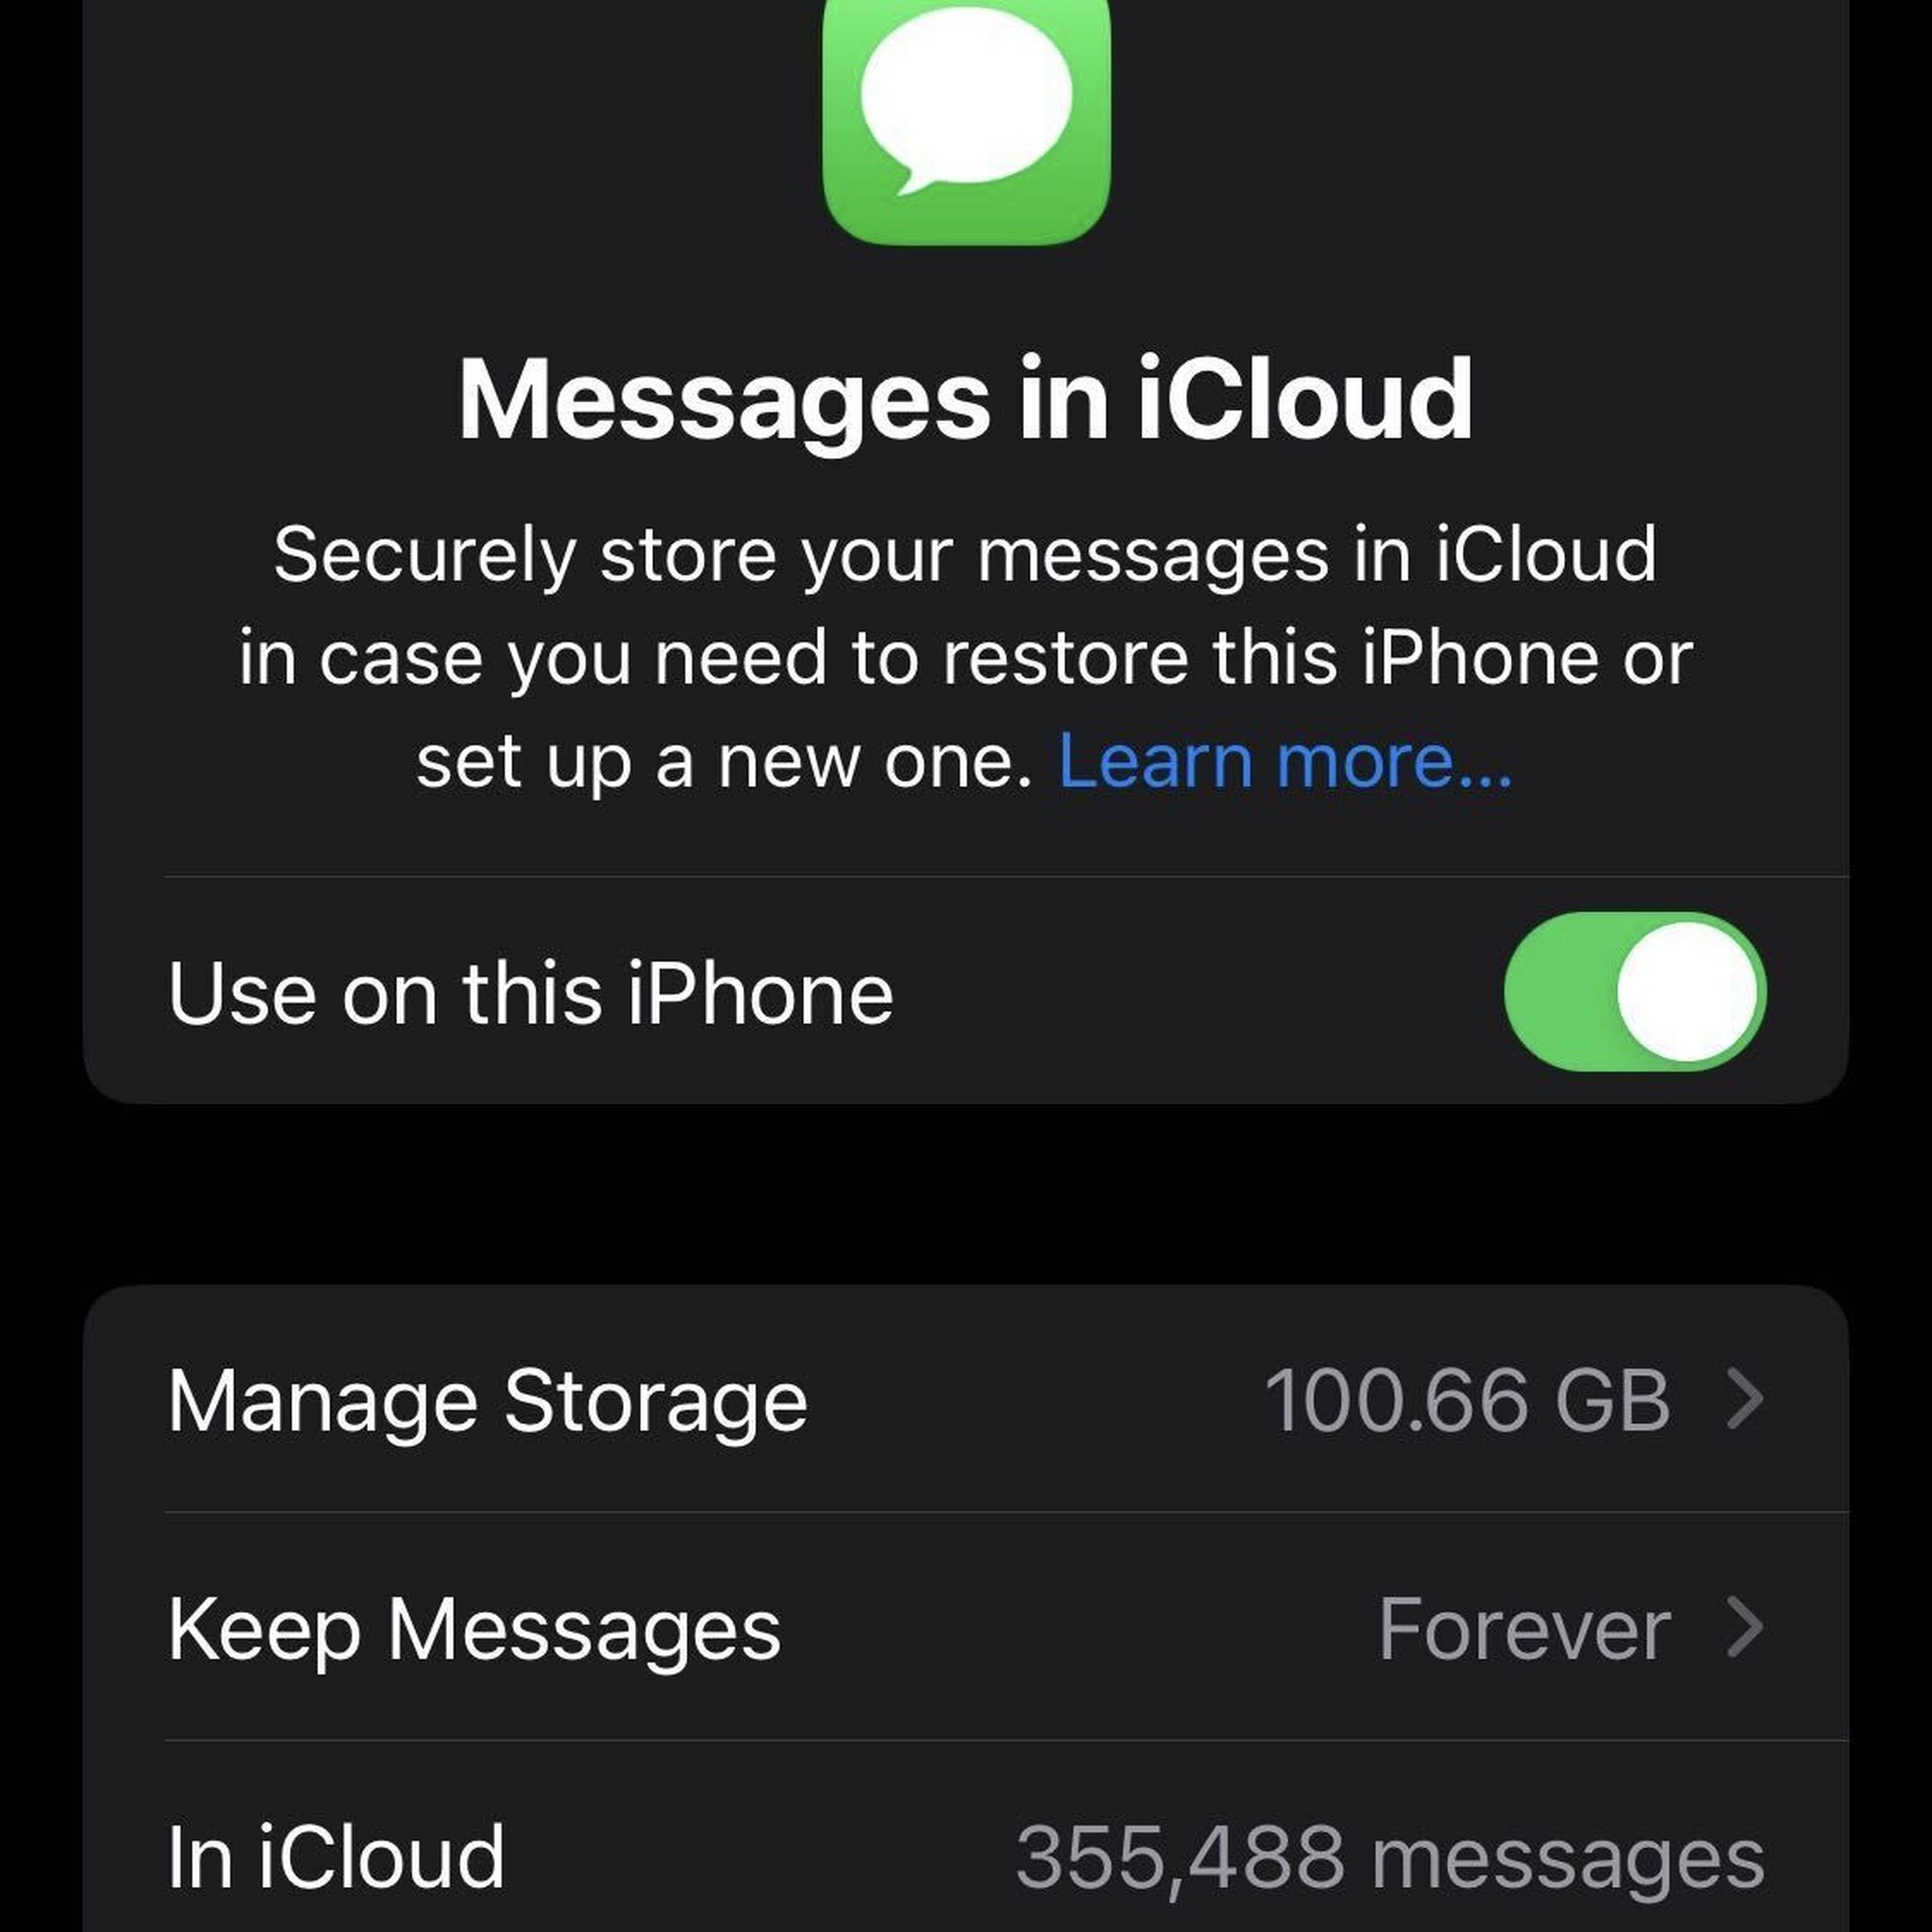 messages in the cloud, 100.66GB used, keep forver, 355,488 messages